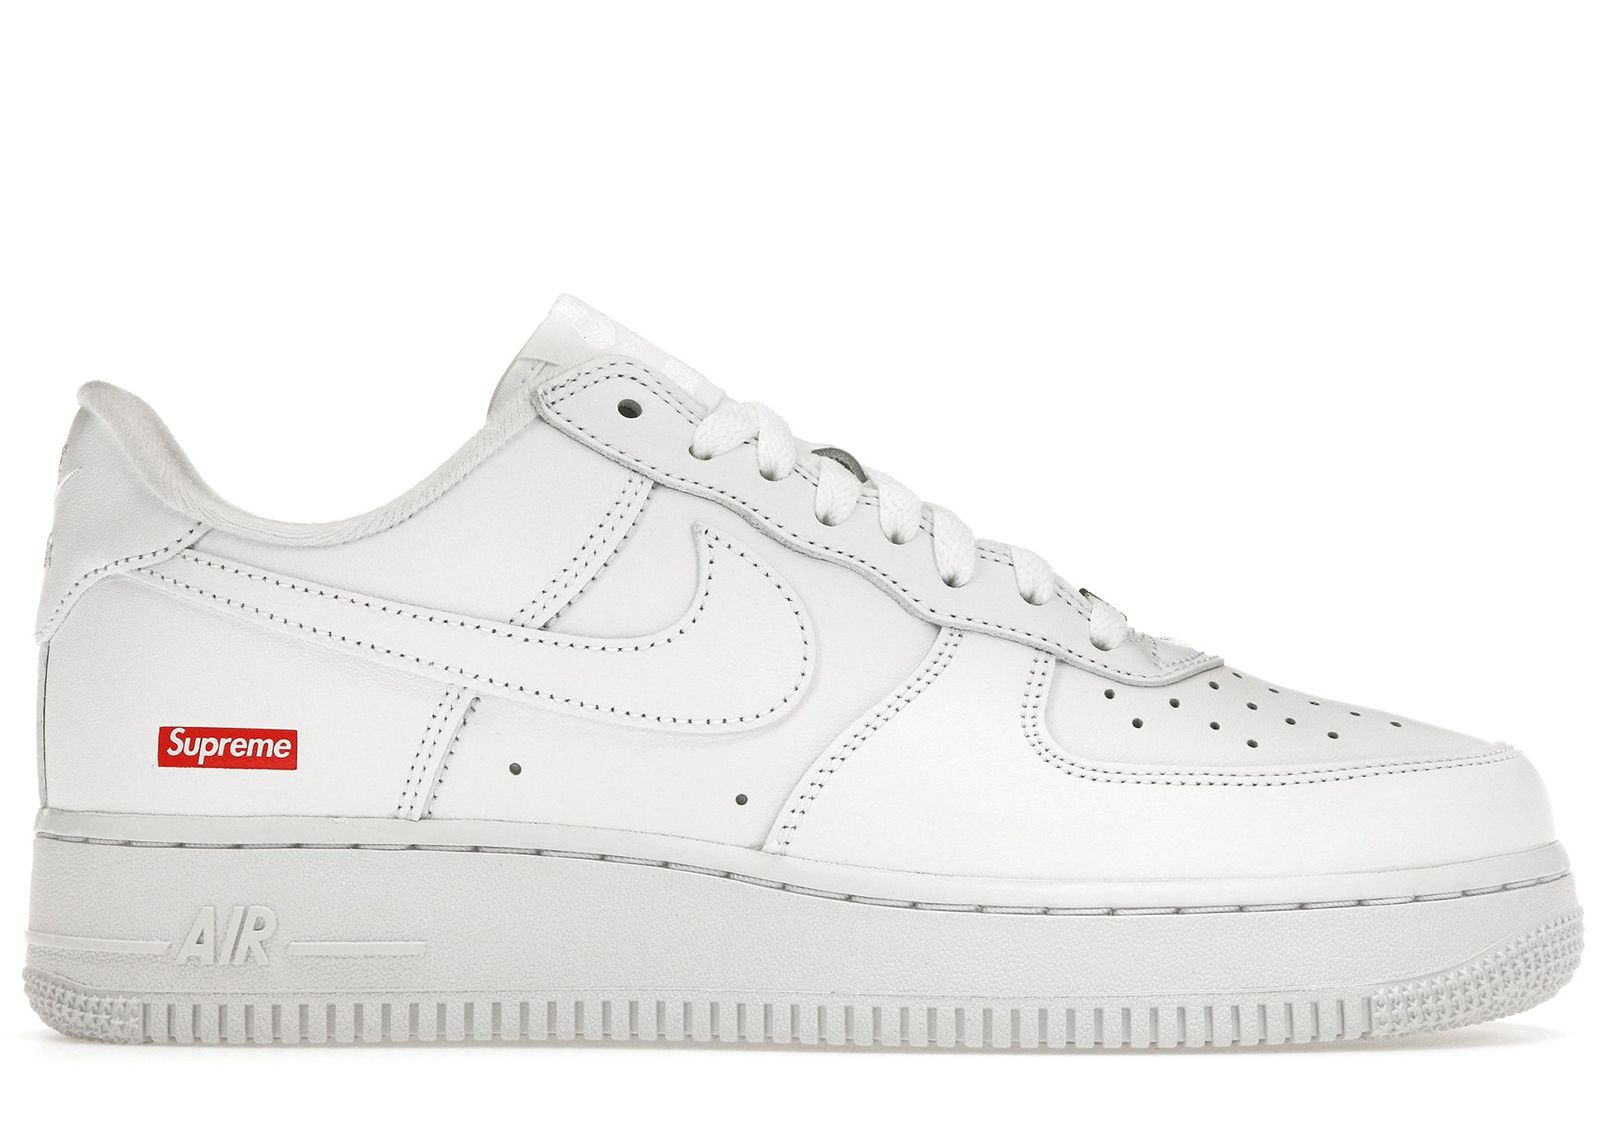 Nike Air Force 1 Low Supreme White | StockX